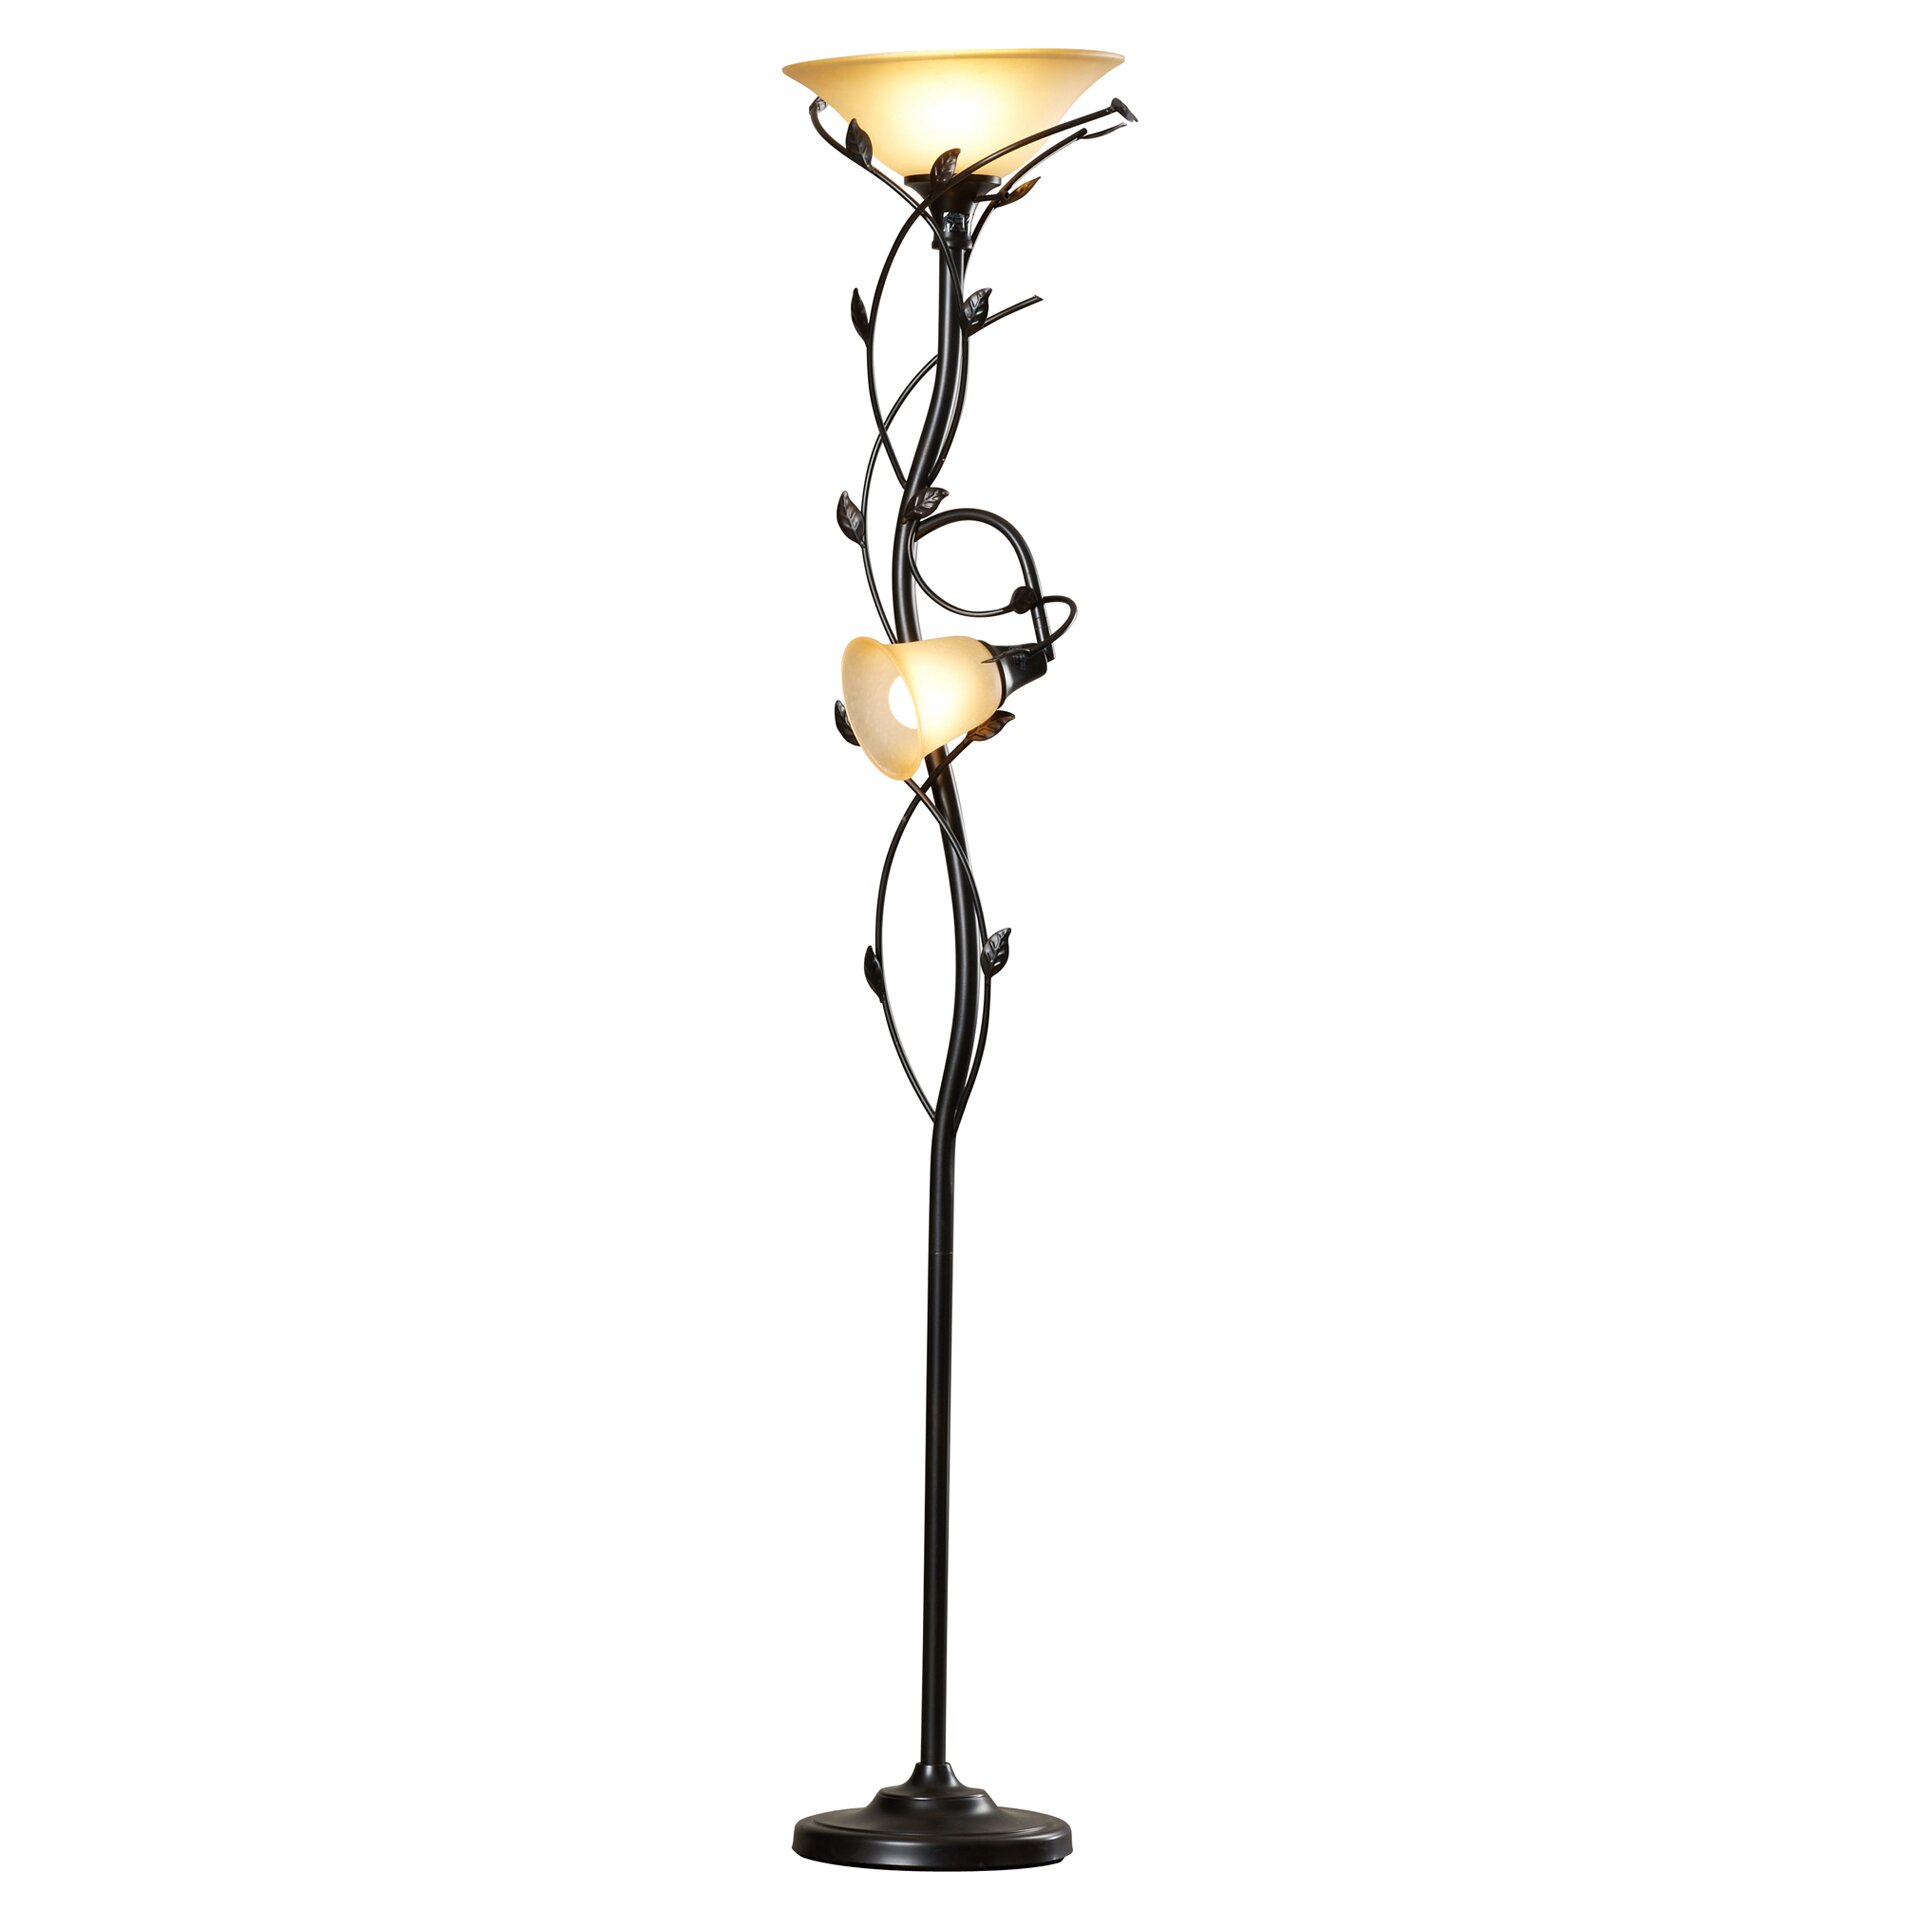 Alcott Hill Crystal 72" LED Torchiere Floor Lamp & Reviews 